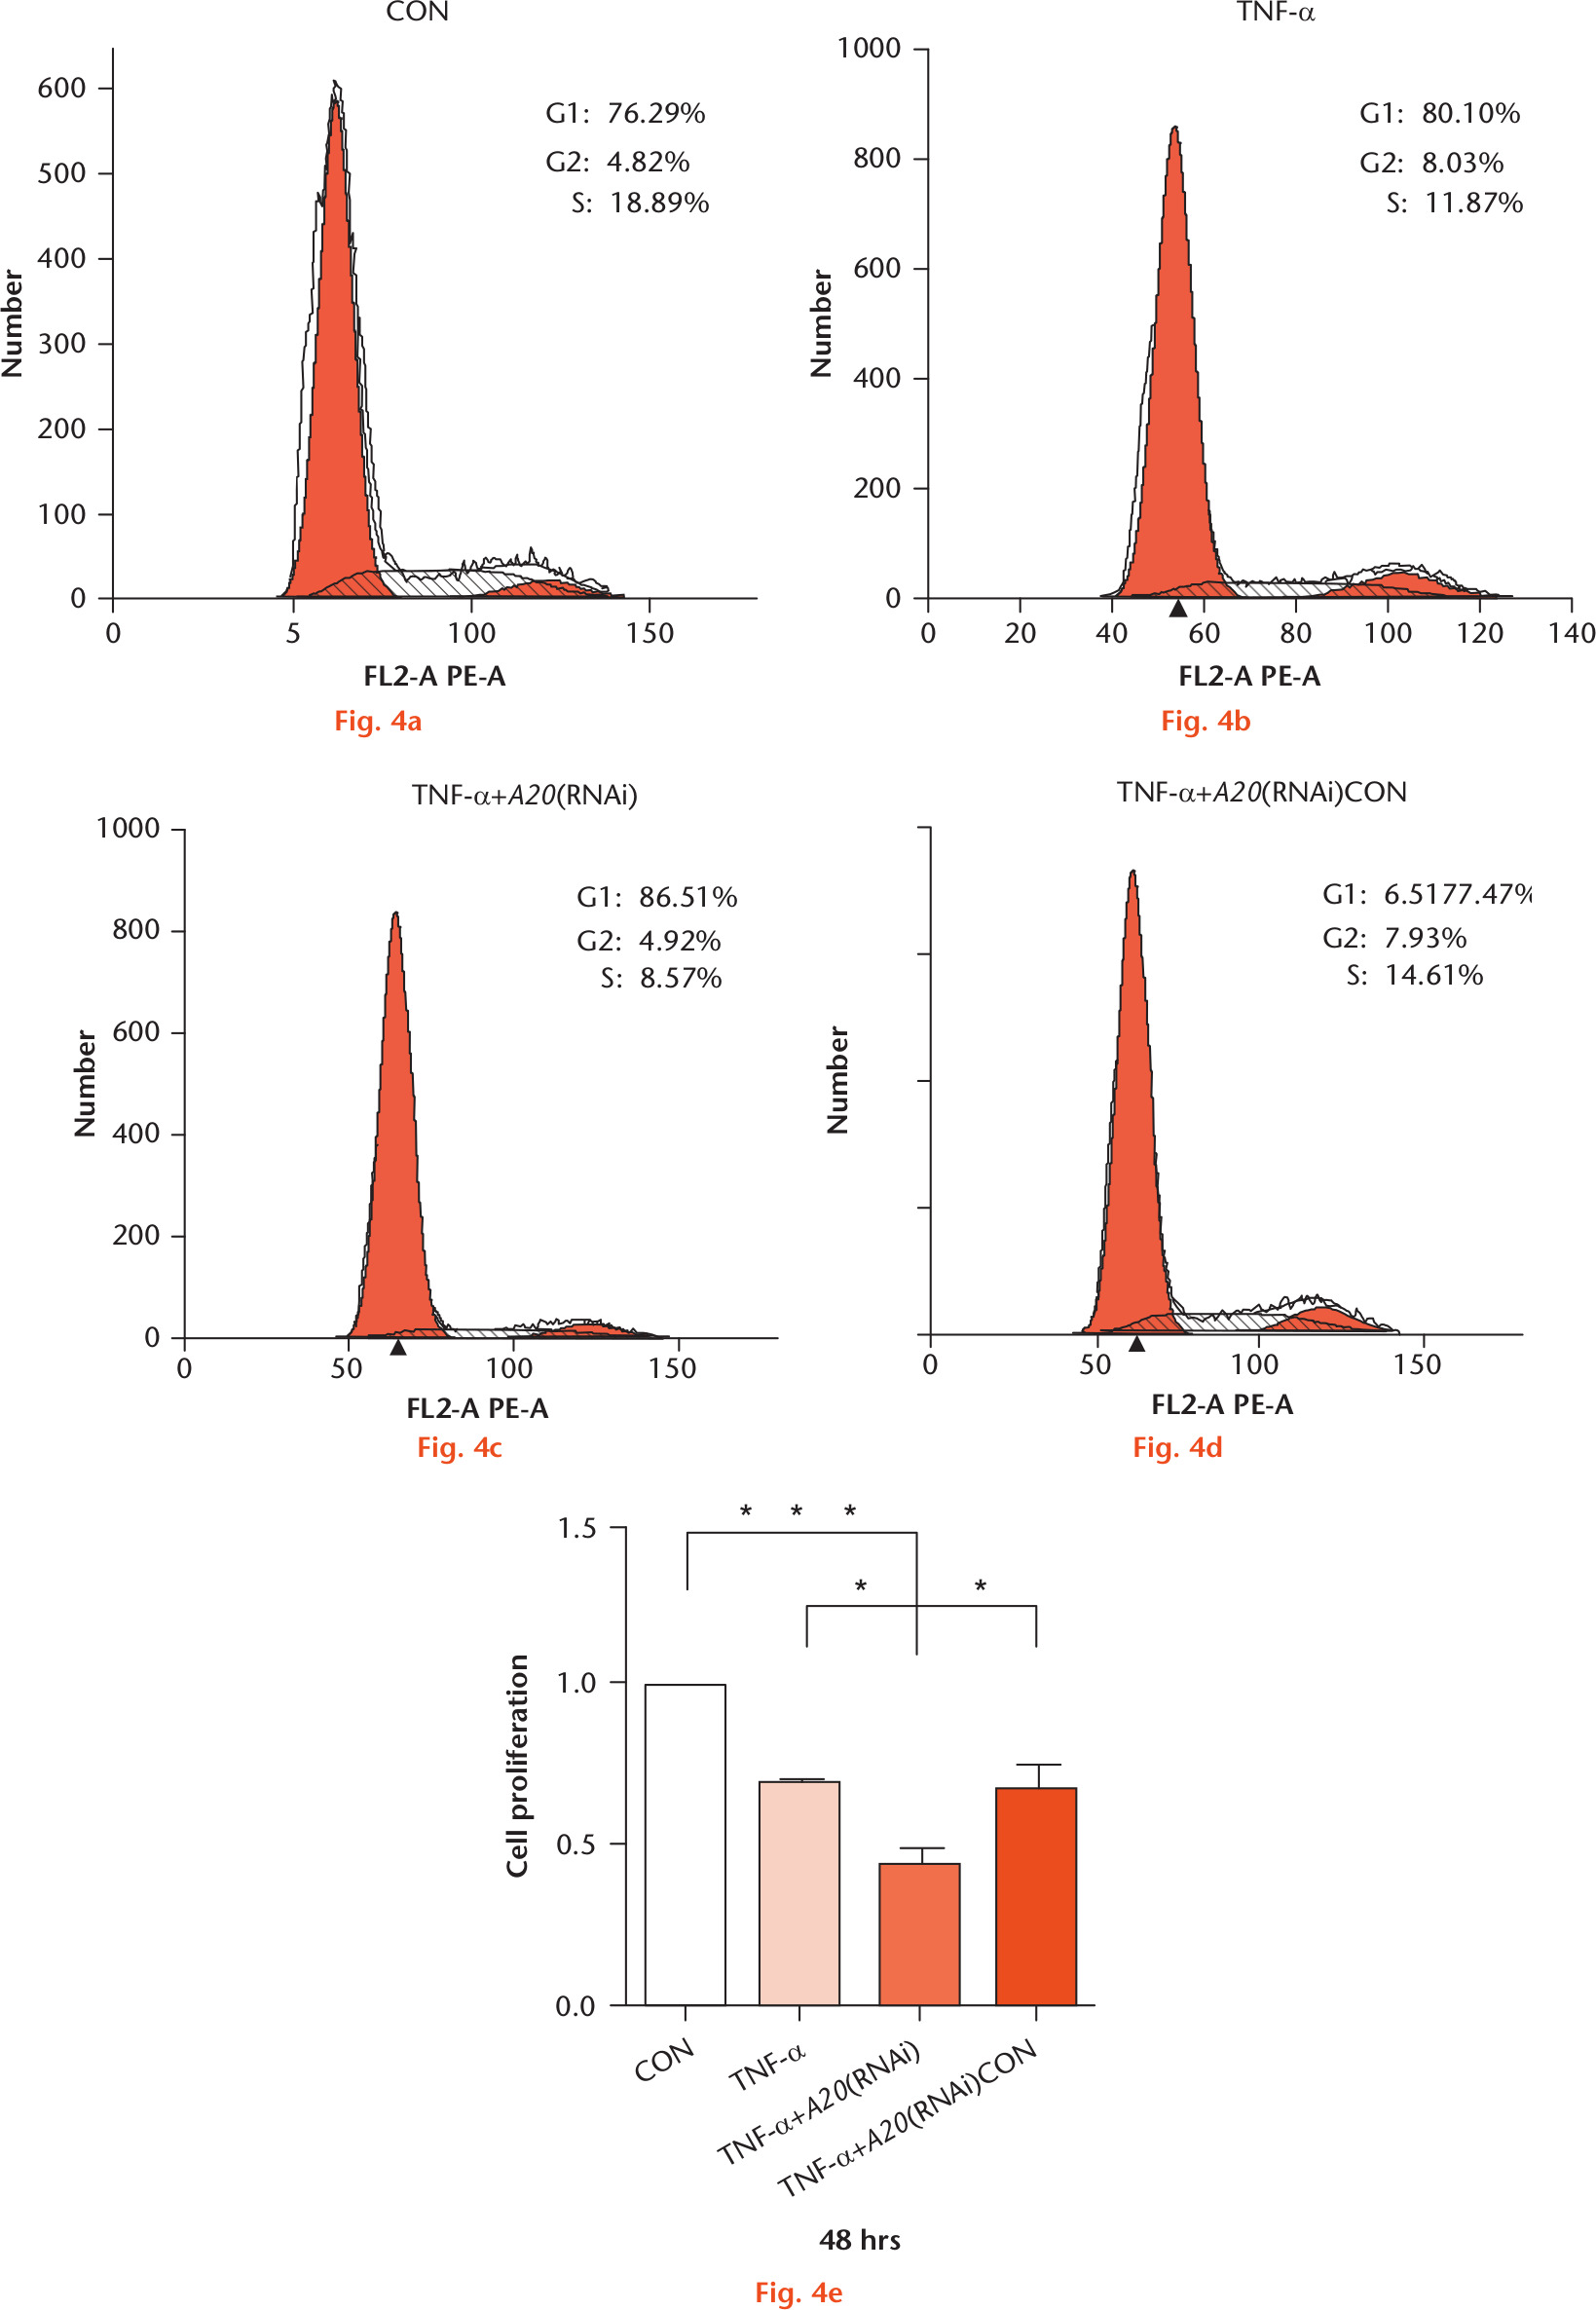 Fig. 4 
            Downregulating A20 expression increased the percentage of G1 phase tumour necrosis factor alpha (TNF-α)-treated nucleus pulposus cells (NPCs) and decreased cell viability. a) to d) Cell cycles were analyzed by flow cytometry in each group. The percentage of NPCs in the G1, G2, and S phases in each group is shown in the respective images. e) The cell proliferation of different test compounds was determined for 48 hours using a Cell Counting Kit 8 (CCK-8) assay. Data are expressed as means (SDs; n = 3). *p < 0.05. CON, control treated with phosphate-buffered saline; RNAi, RNA interference.
          